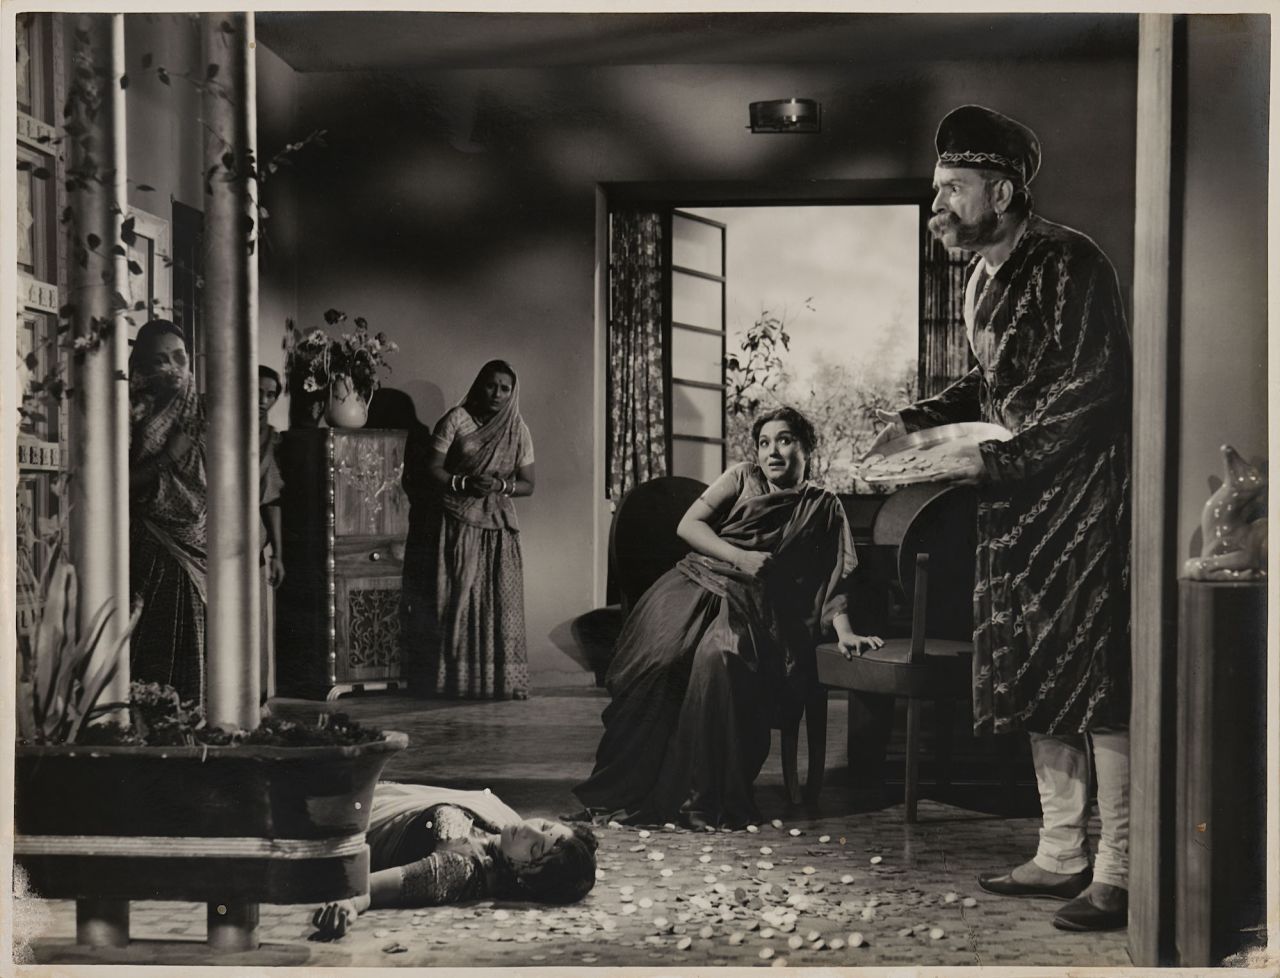 A still from the 1950 movie "Dahej," which MAP's exhibition catalog describes as a "powerful critique of the practice of dowry in India."